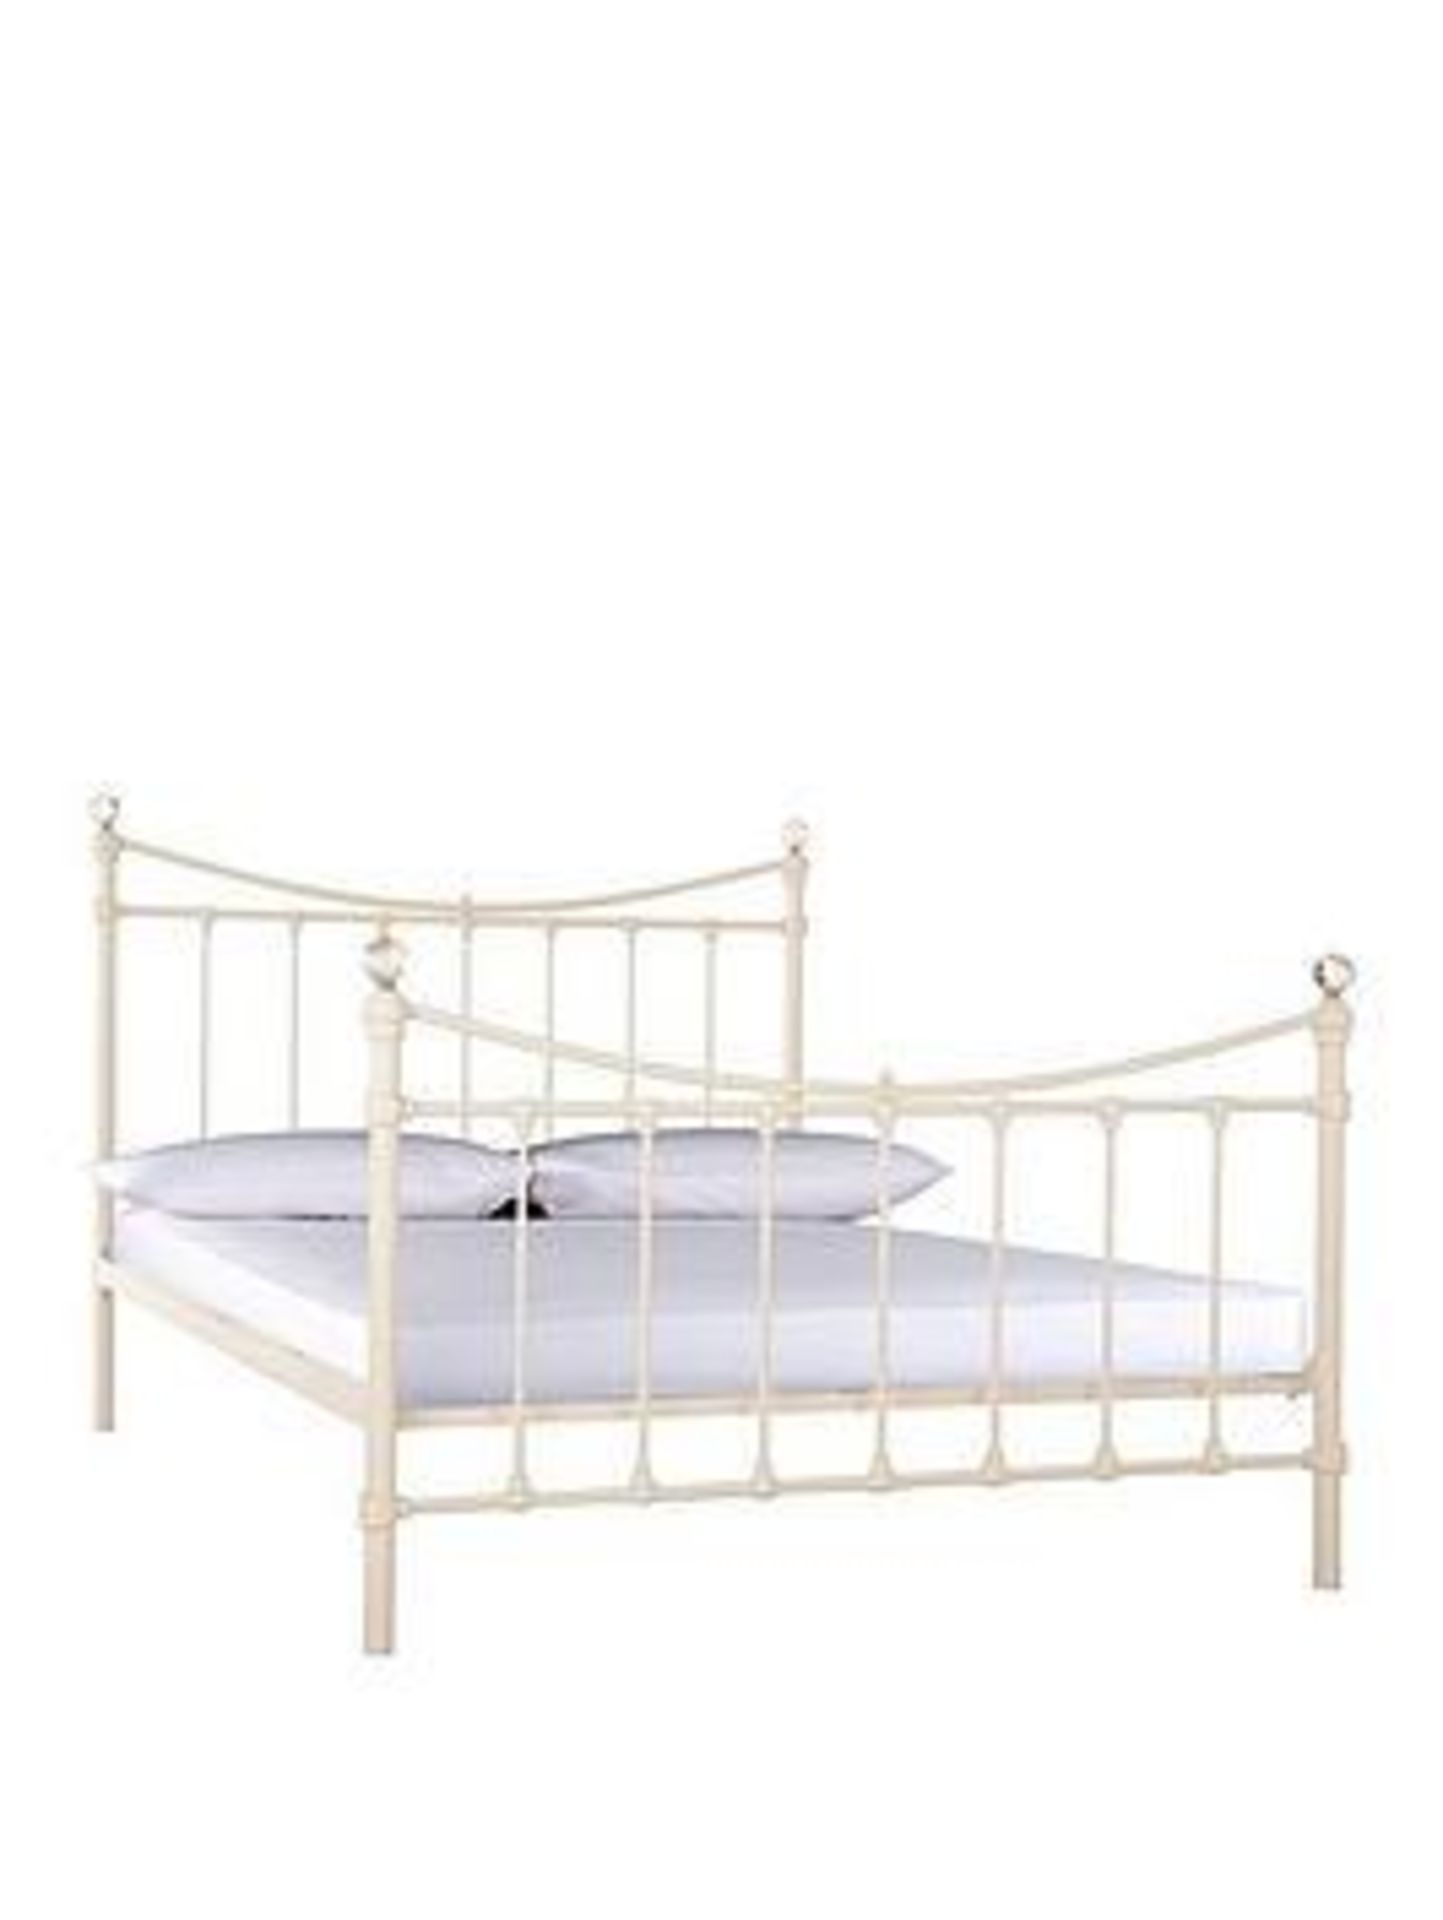 Boxed Item Ruby King Bed [Cream] 120X161X202Cm Rrp:£394.0